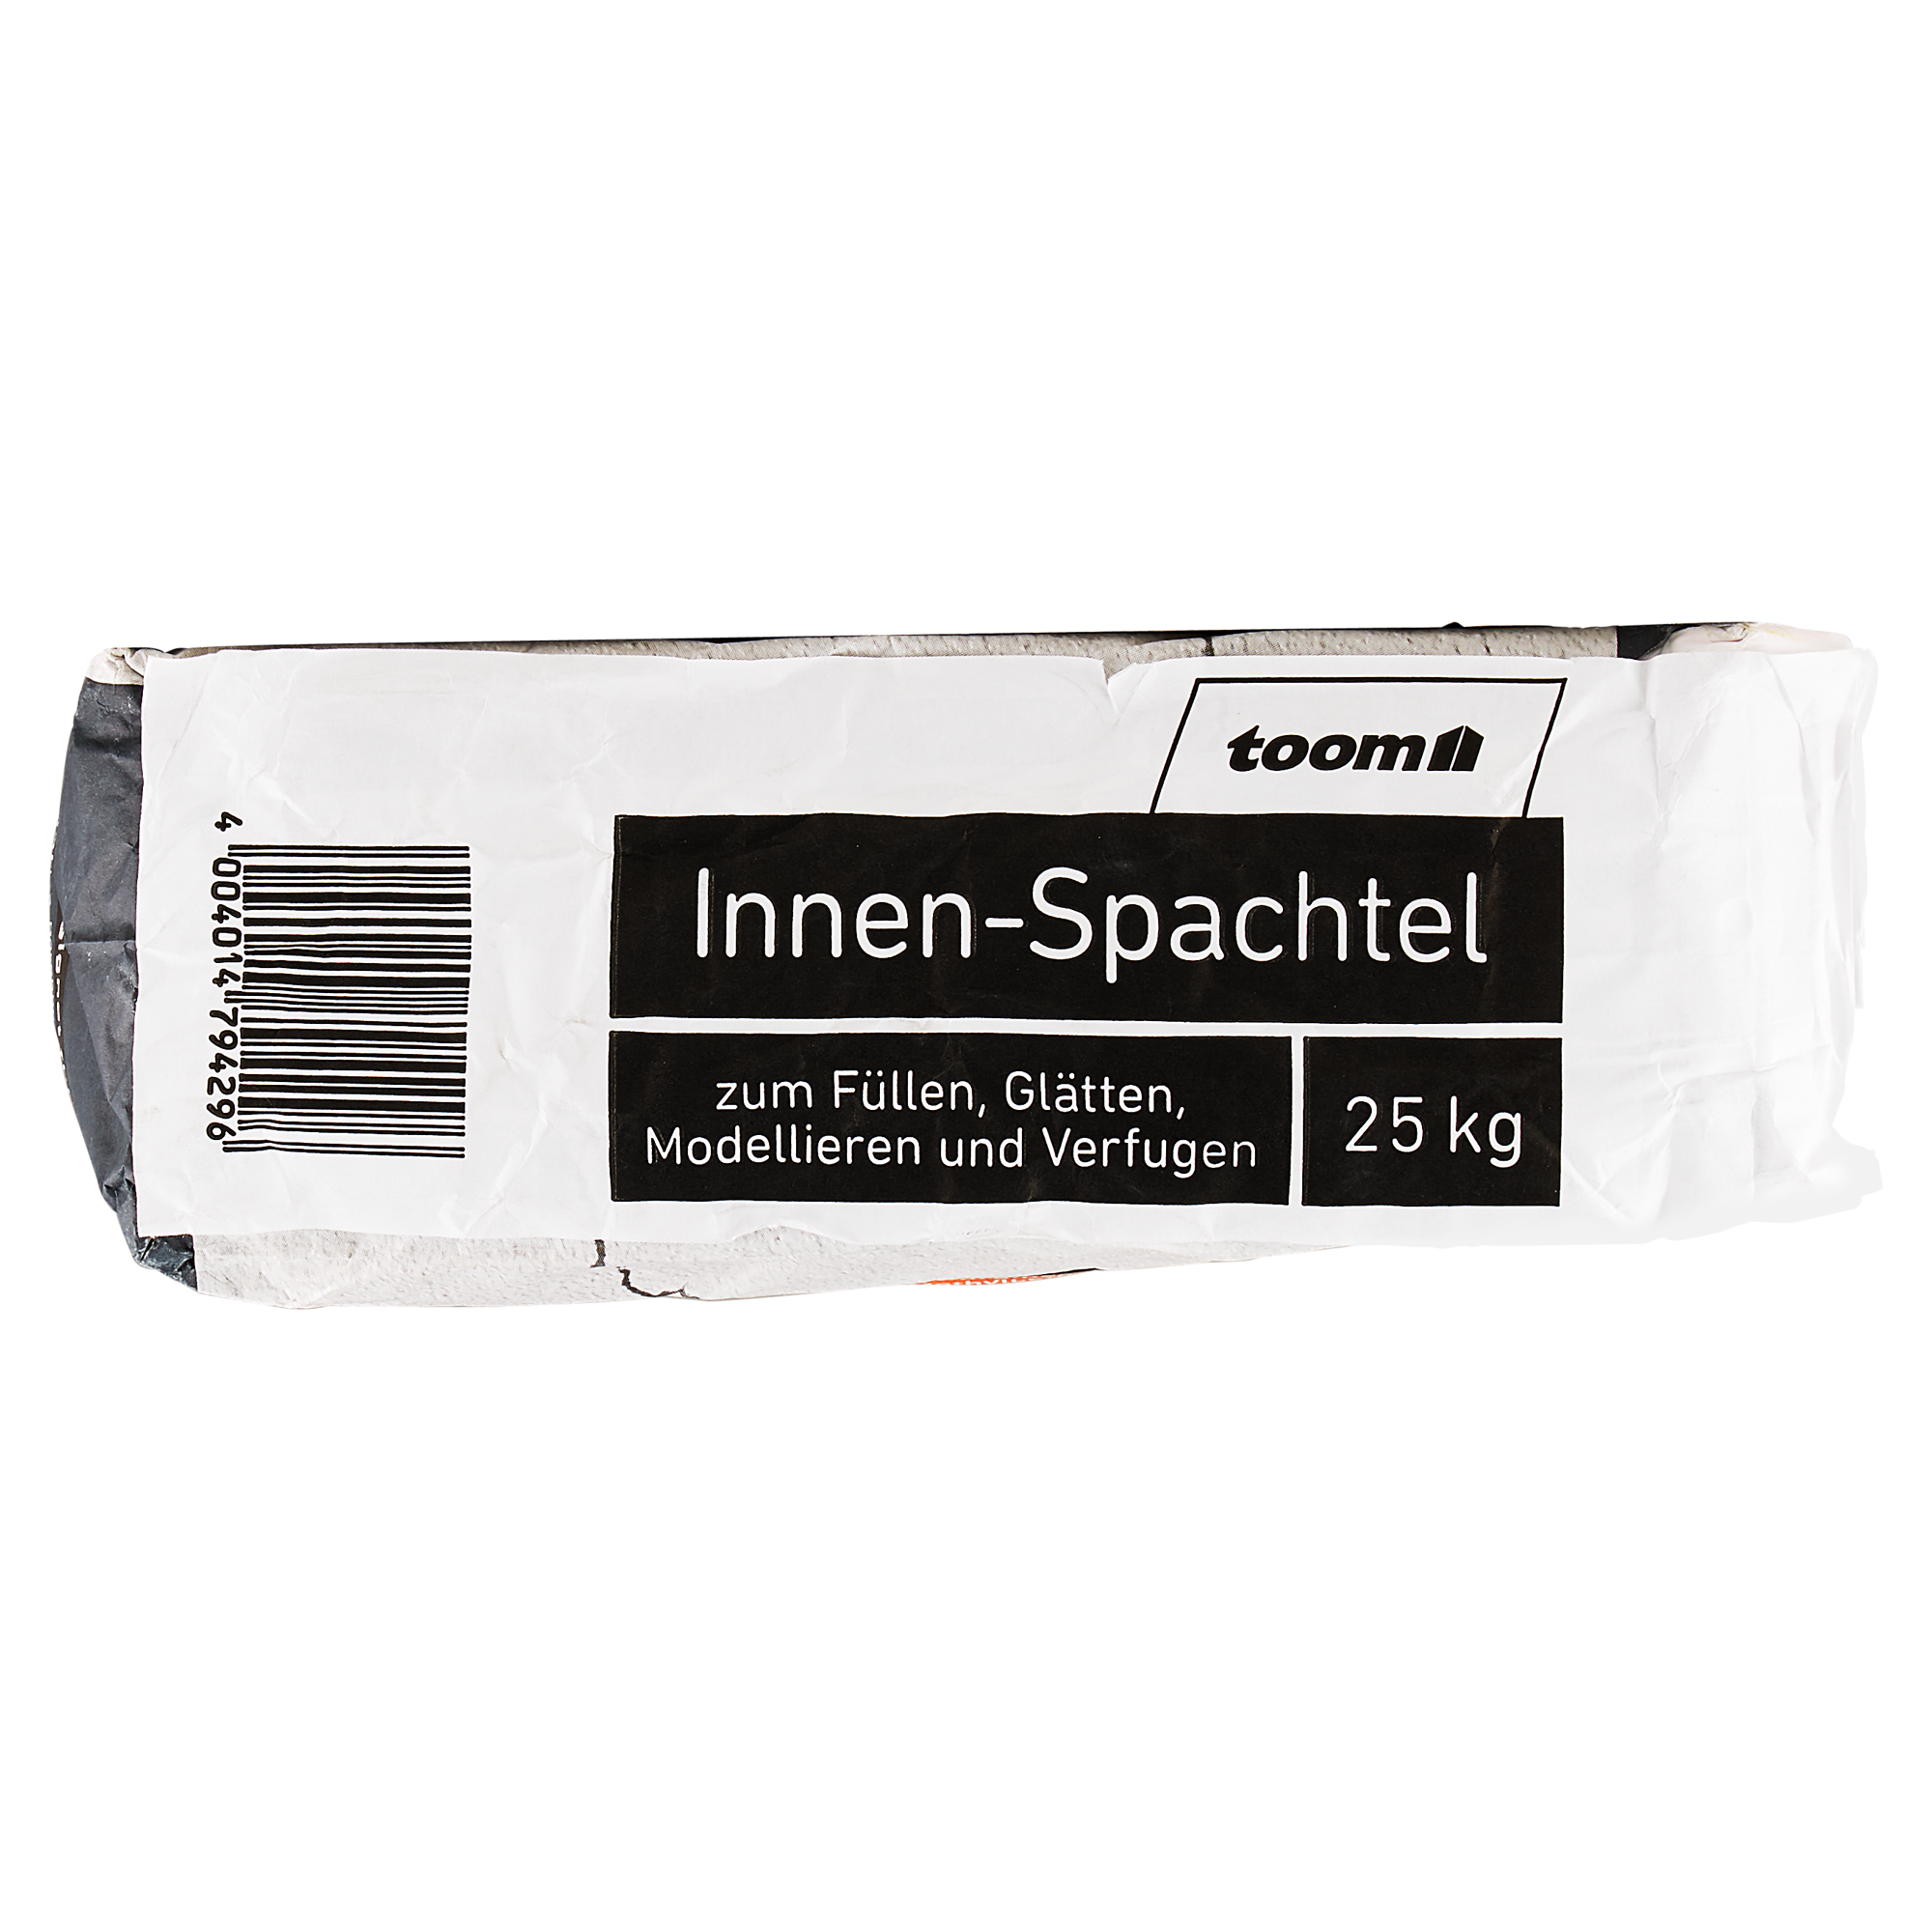 Innenspachtel 25 kg + product picture